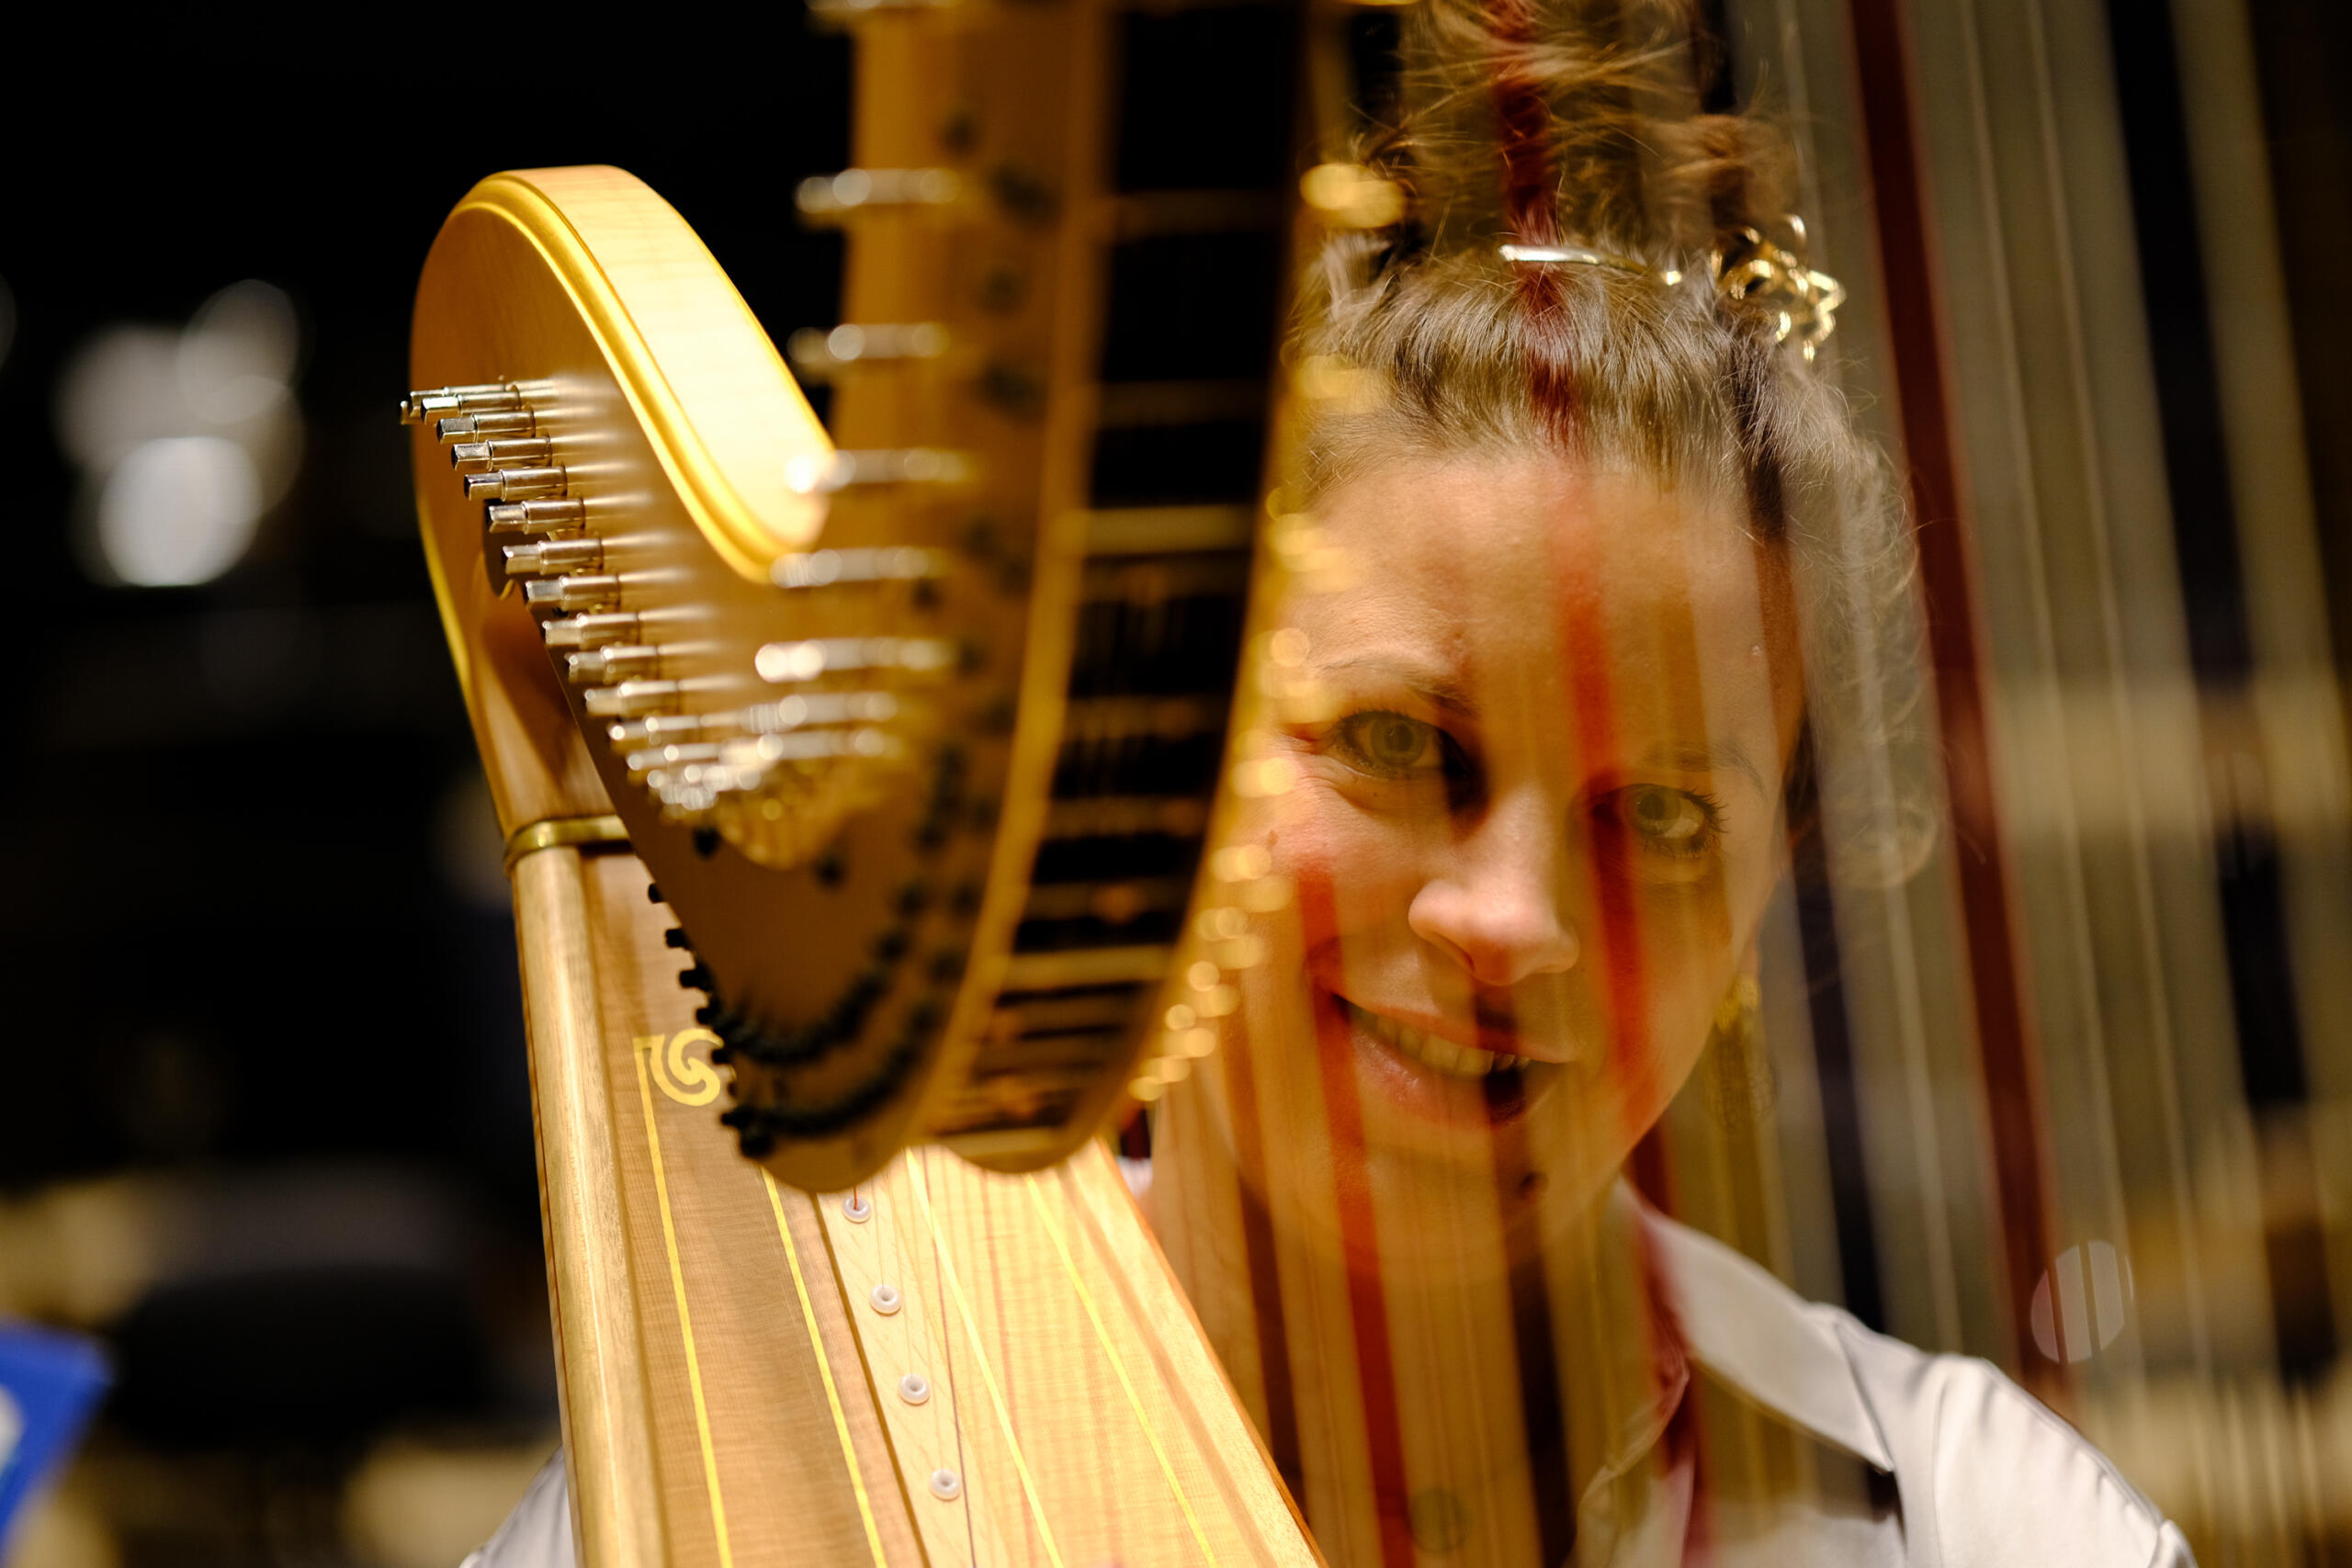 The harpist looks between the strings of her harp and smiles.